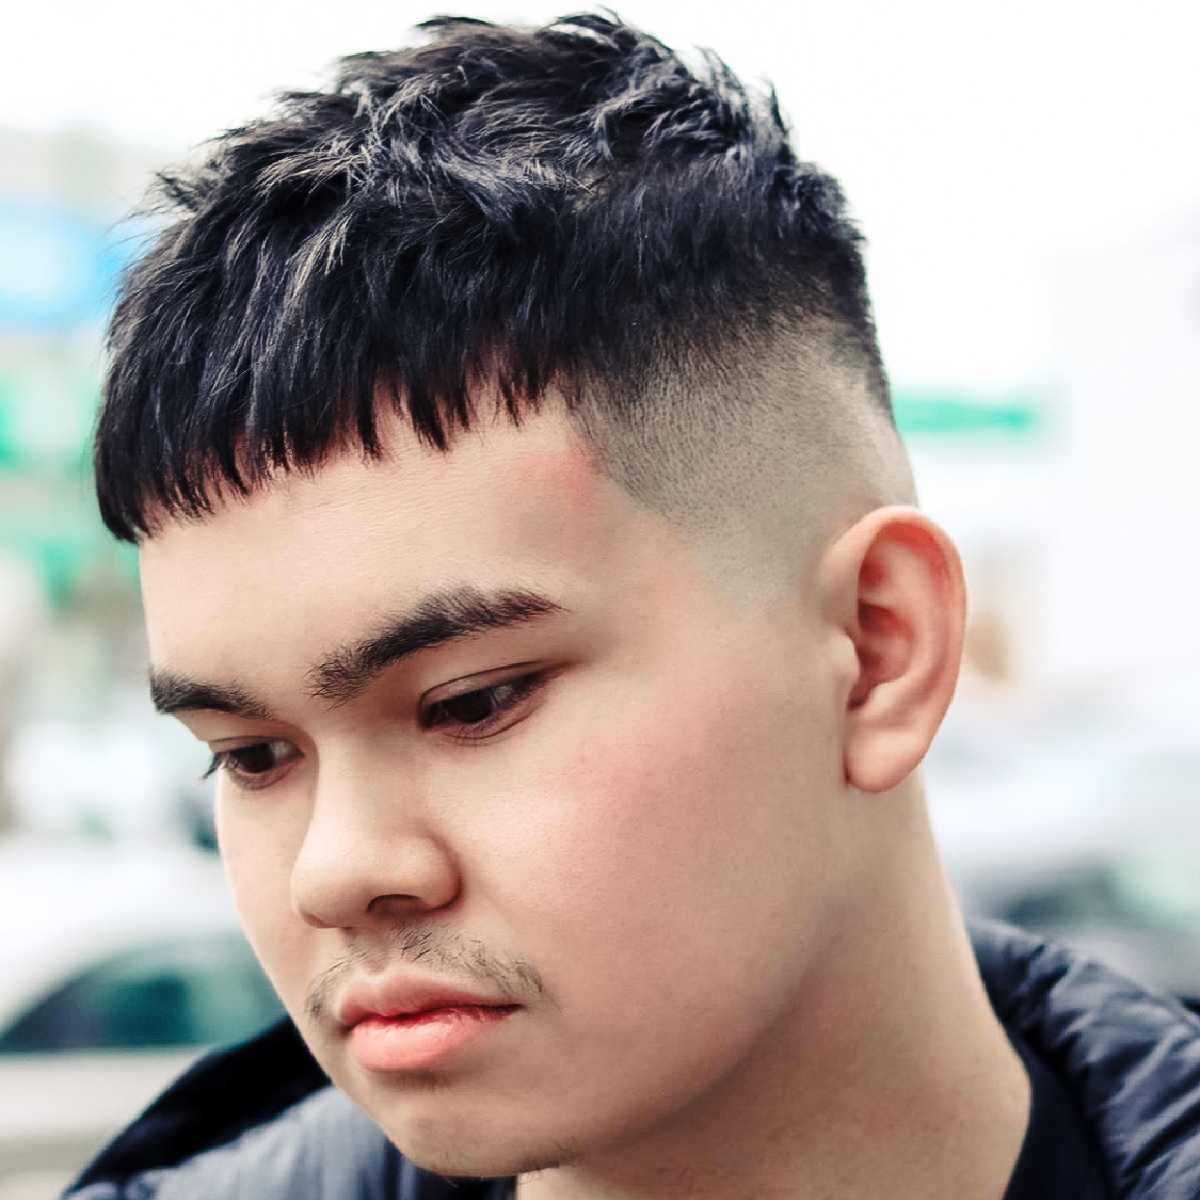 Fade Haircuts Types for Men: A Style Guide | Headquarters Blog